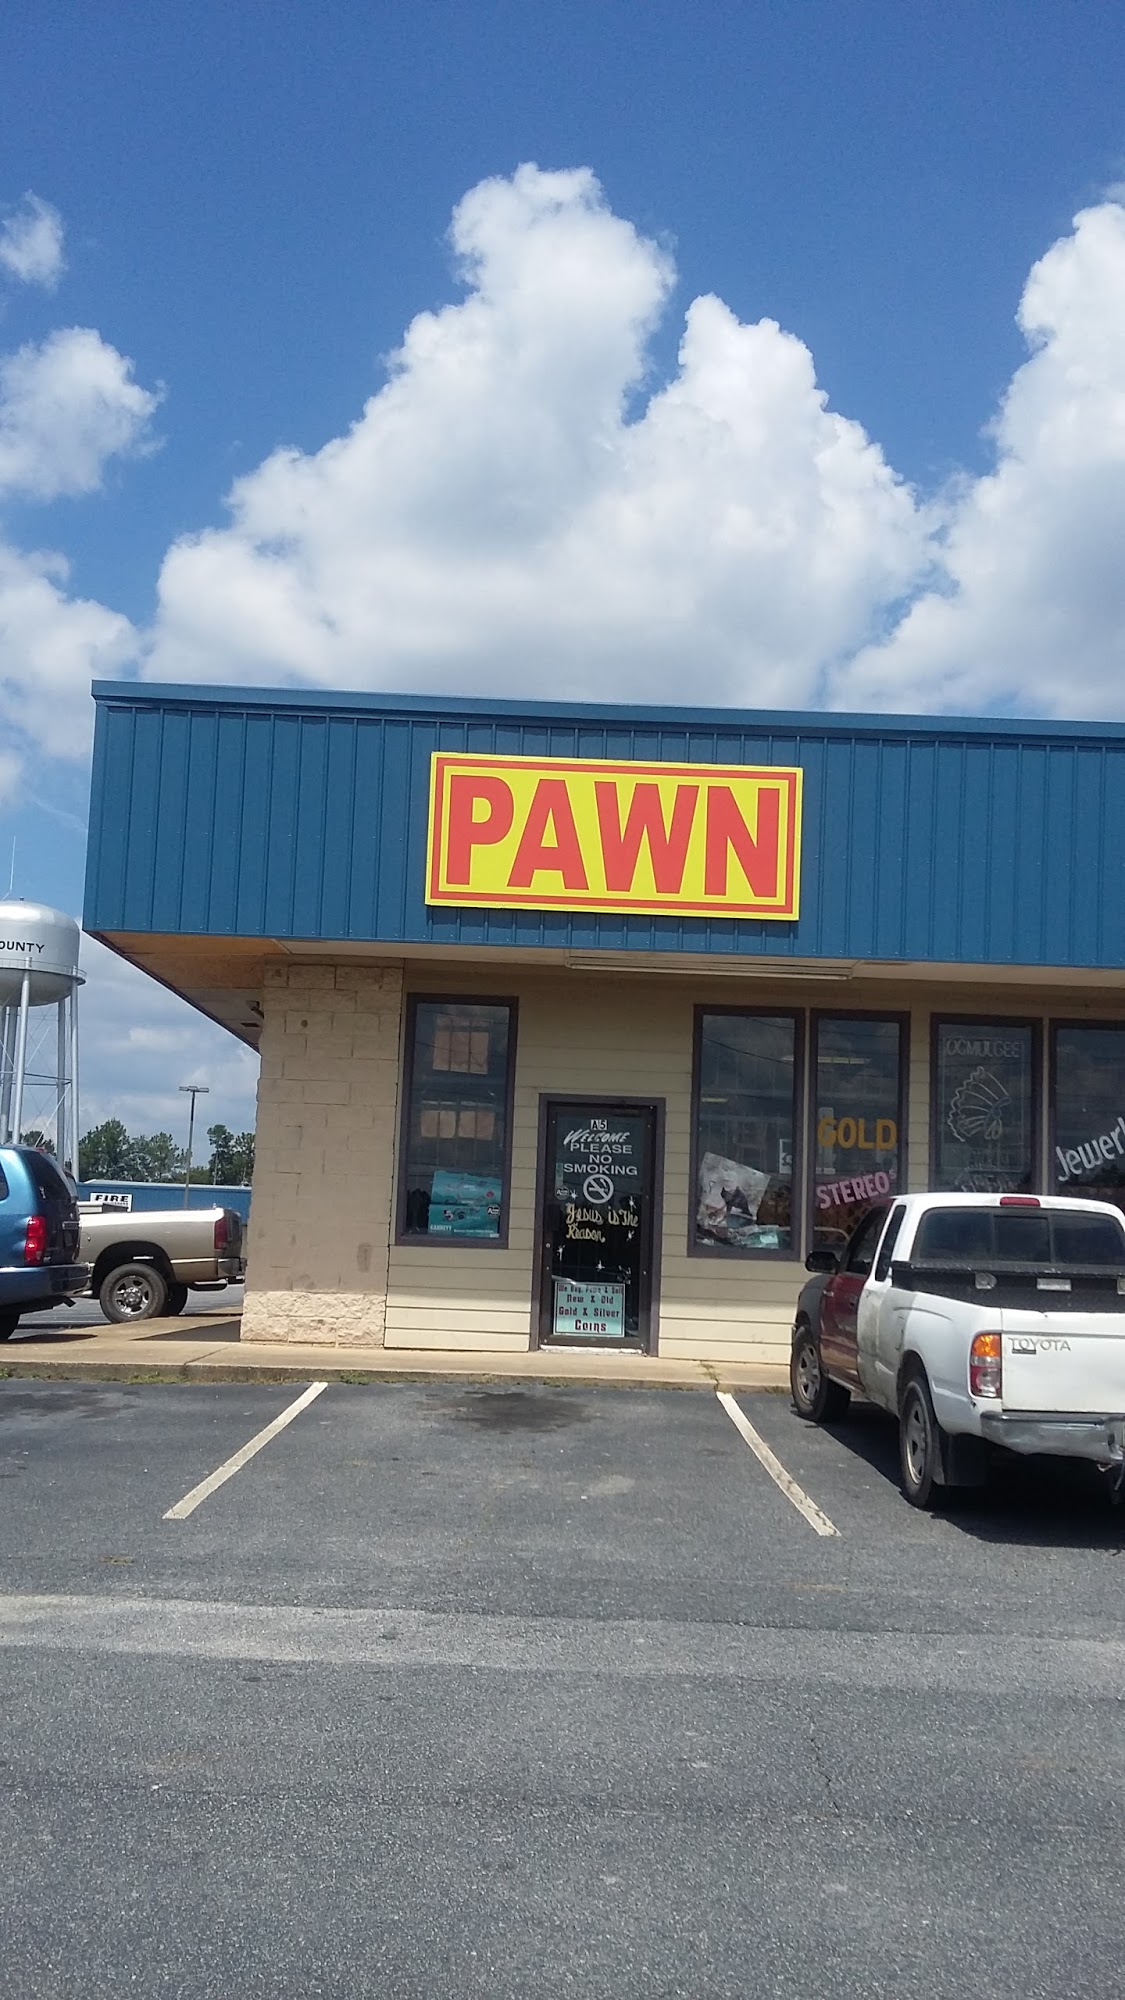 Ocmulgee Pawn & Trading Co